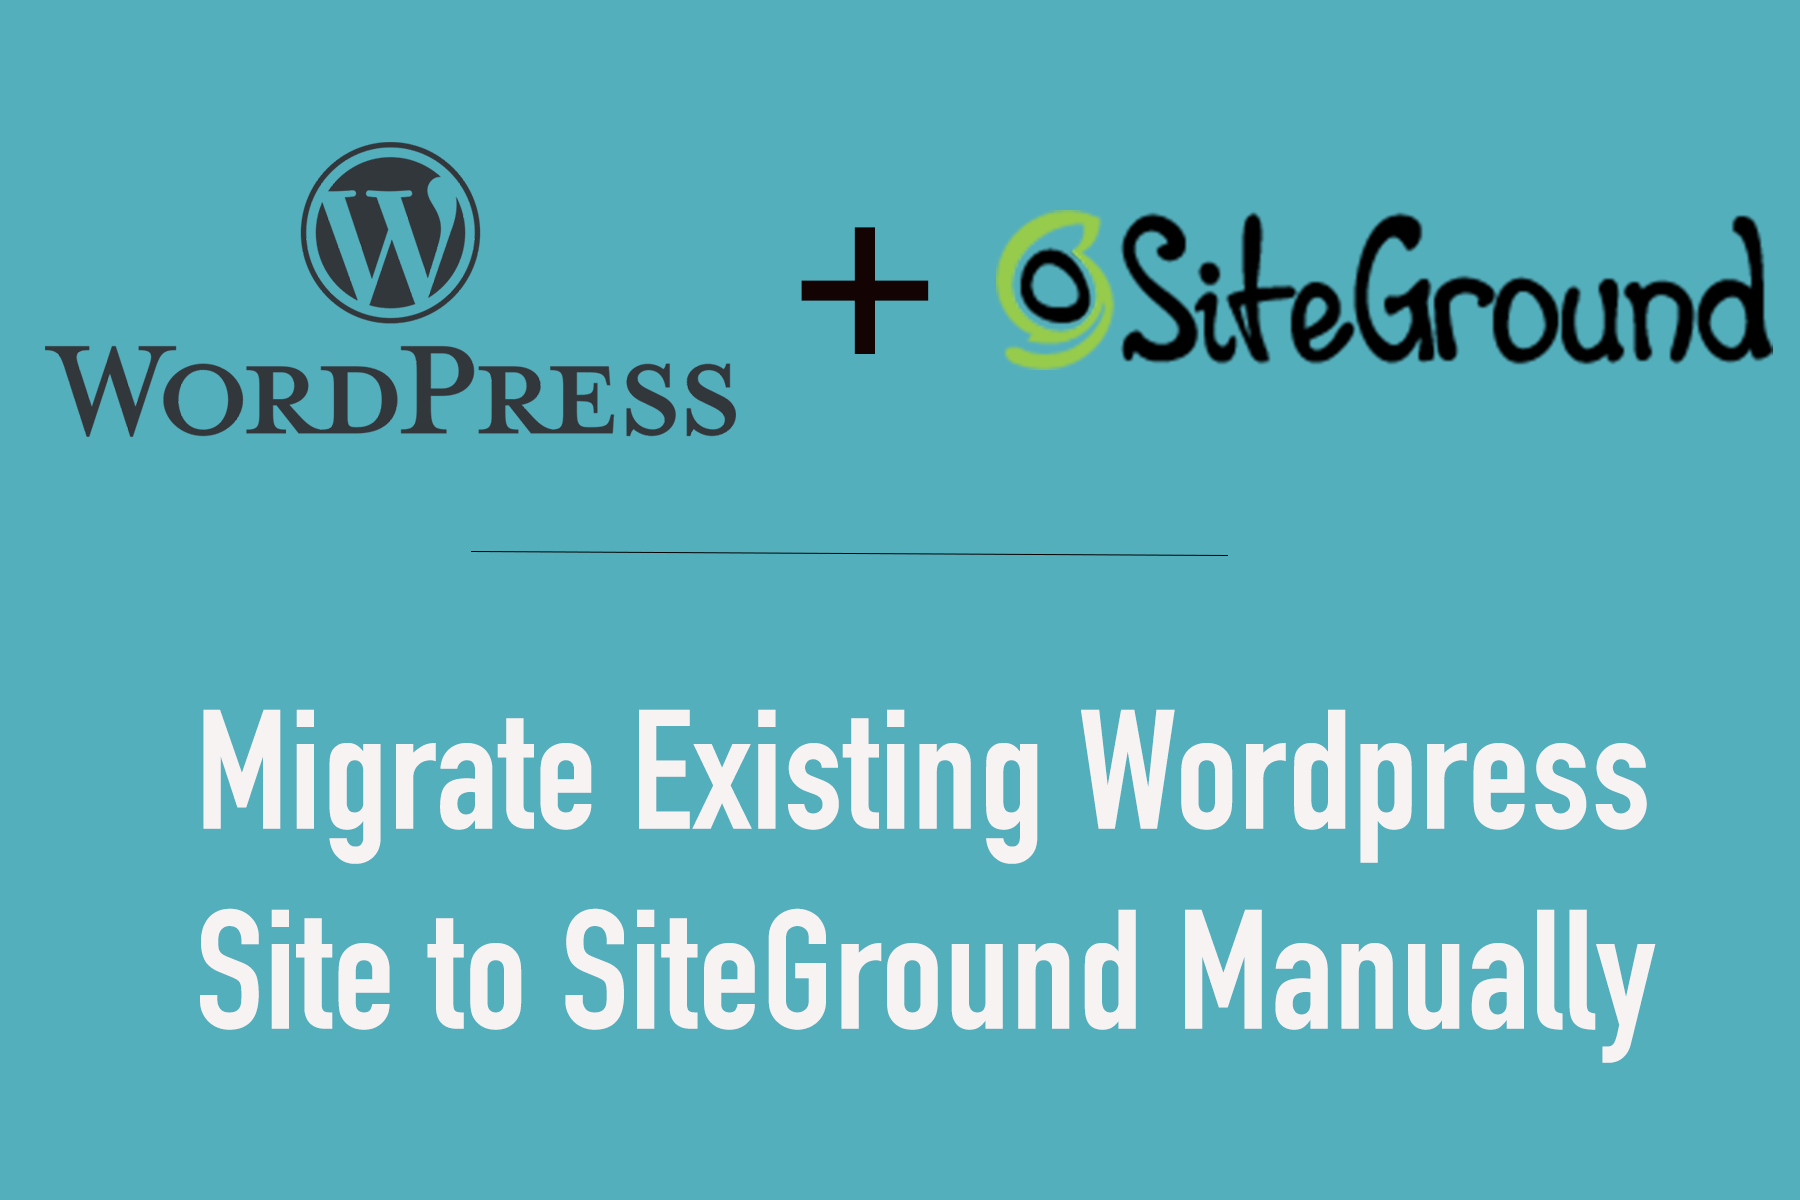 Migrate Existing Wordpress Site to SiteGround Manually